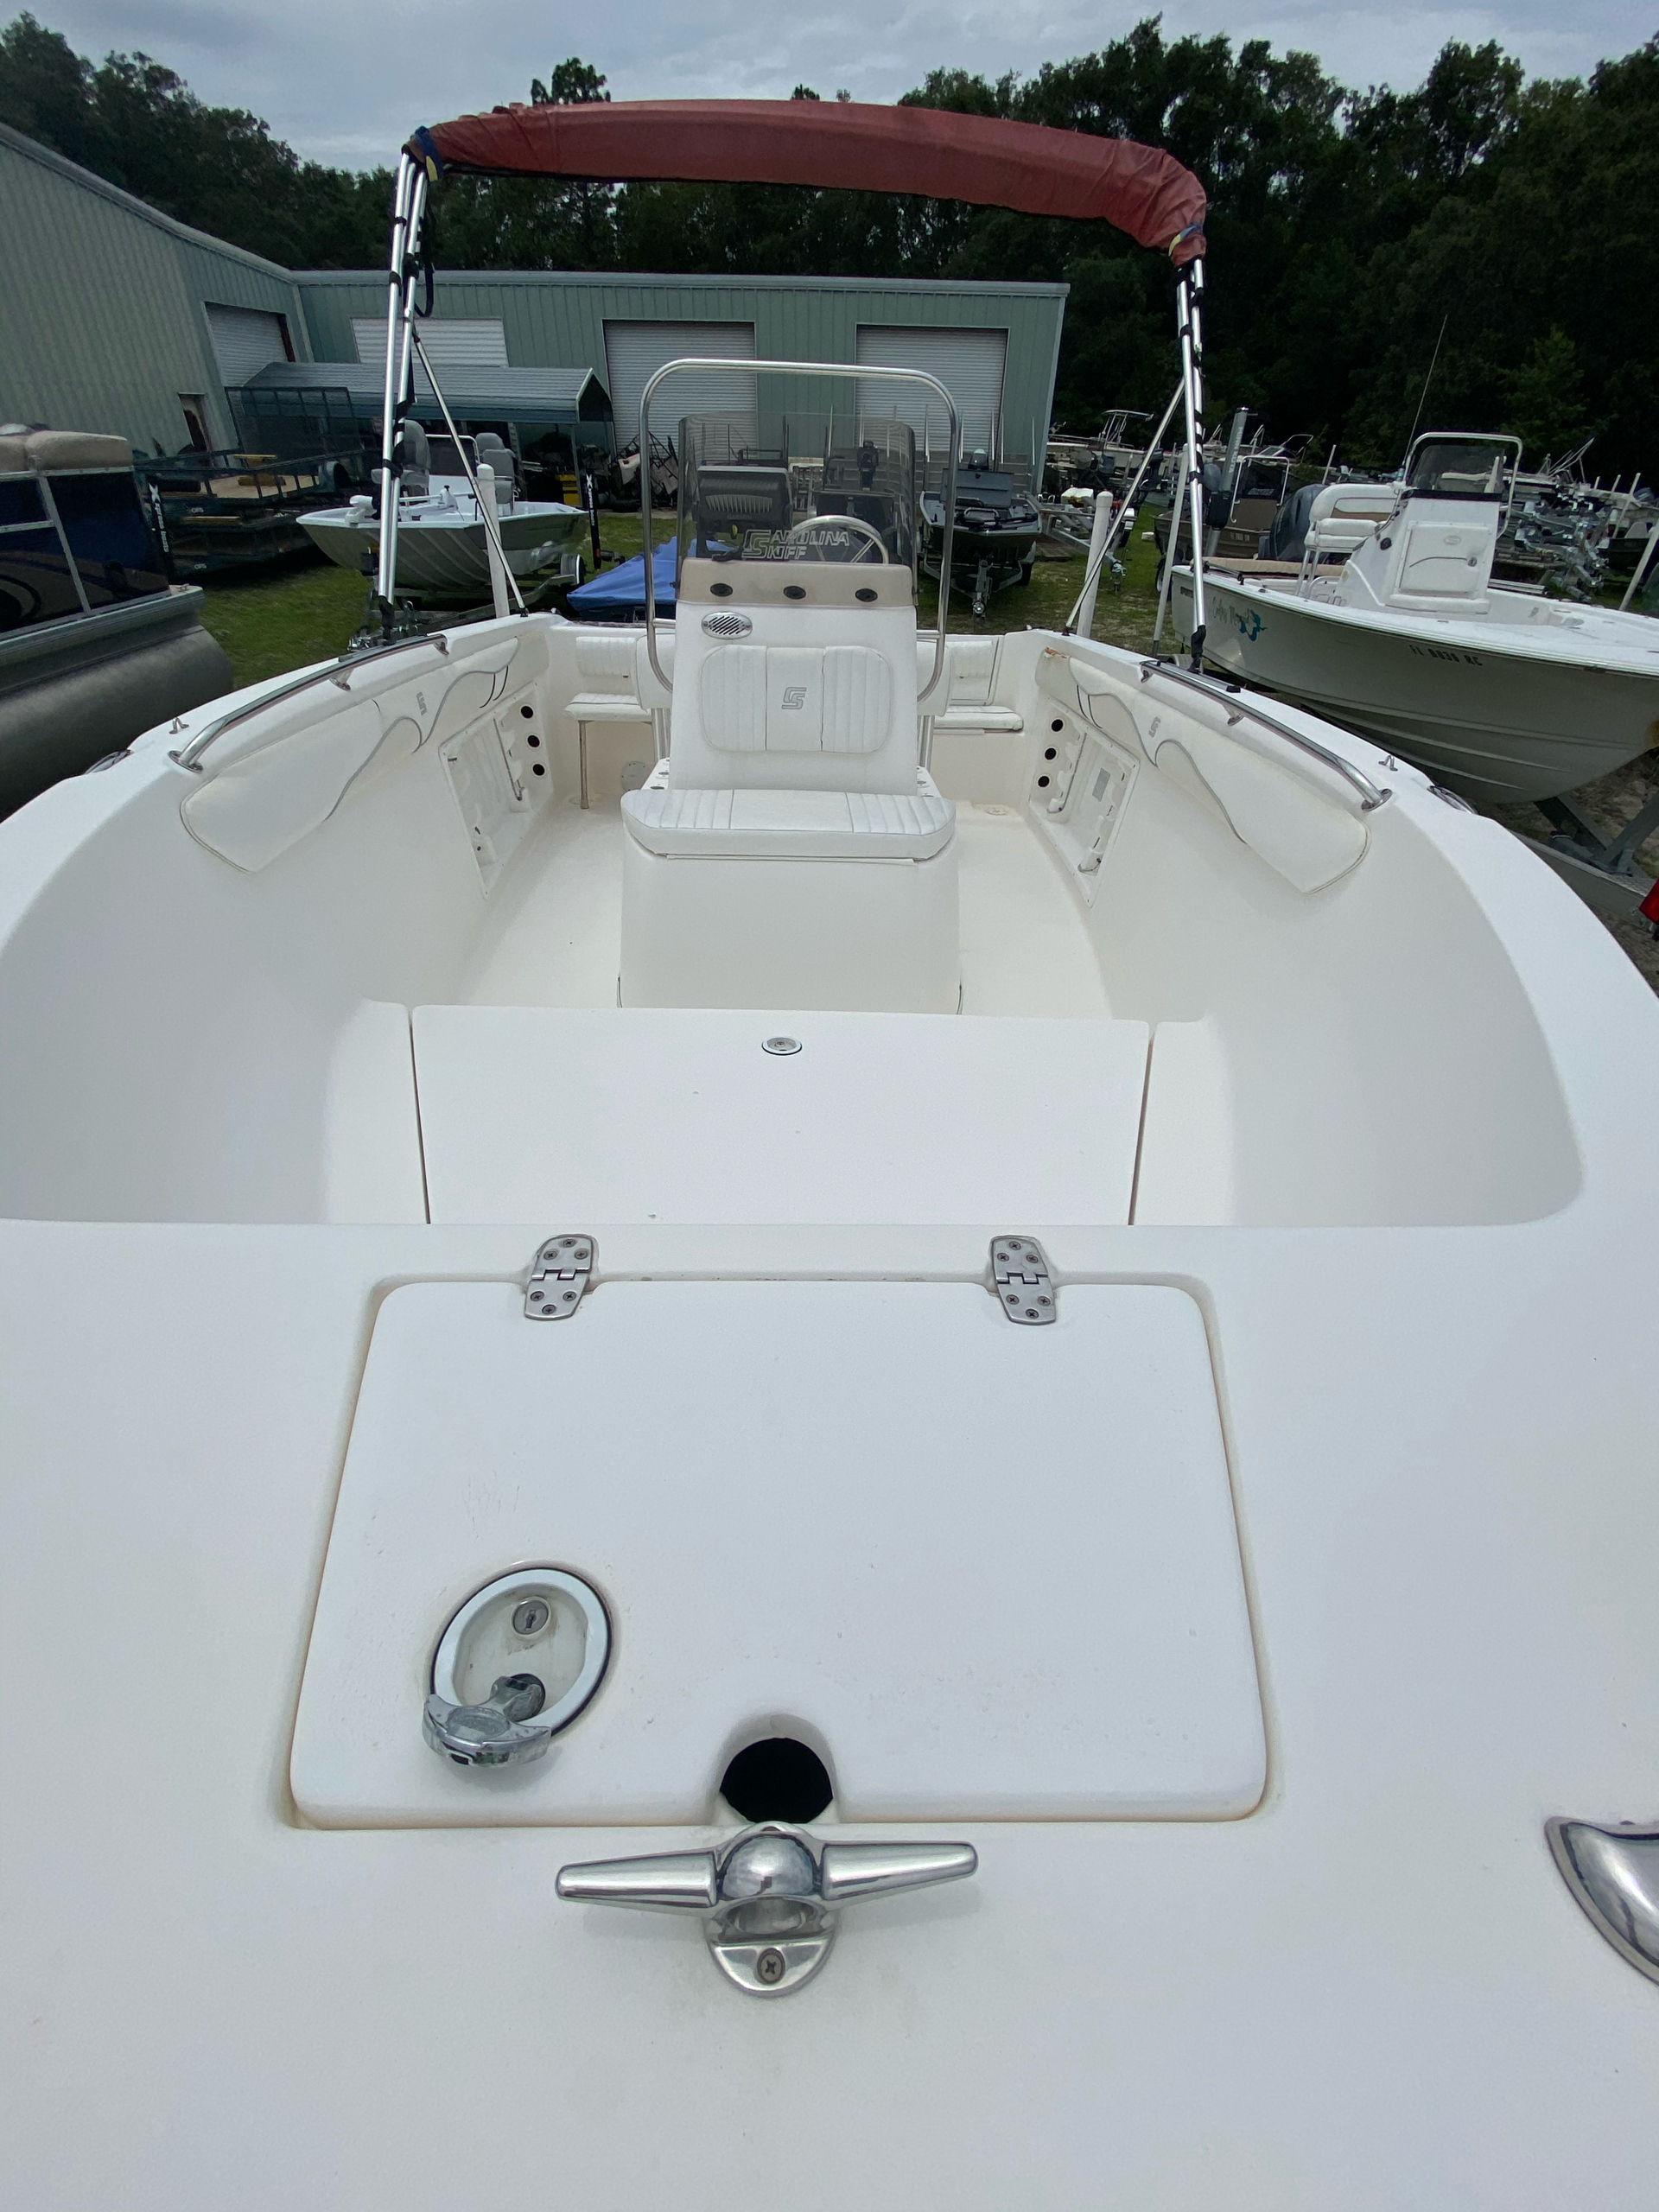 2011 Sea Chaser 1900 CC in Perry, Florida - Photo 4